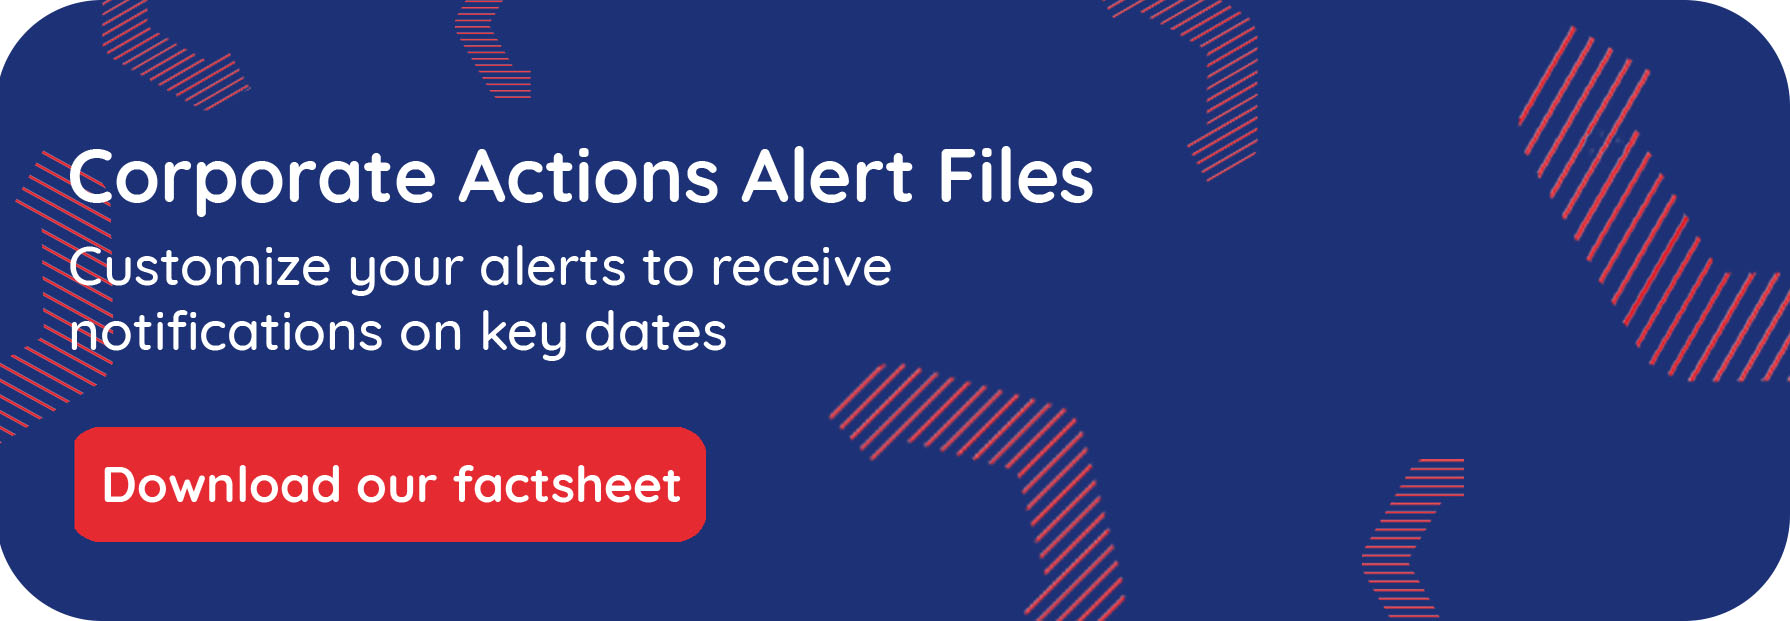 CTA Banner for Worldwide corporate actions alert files